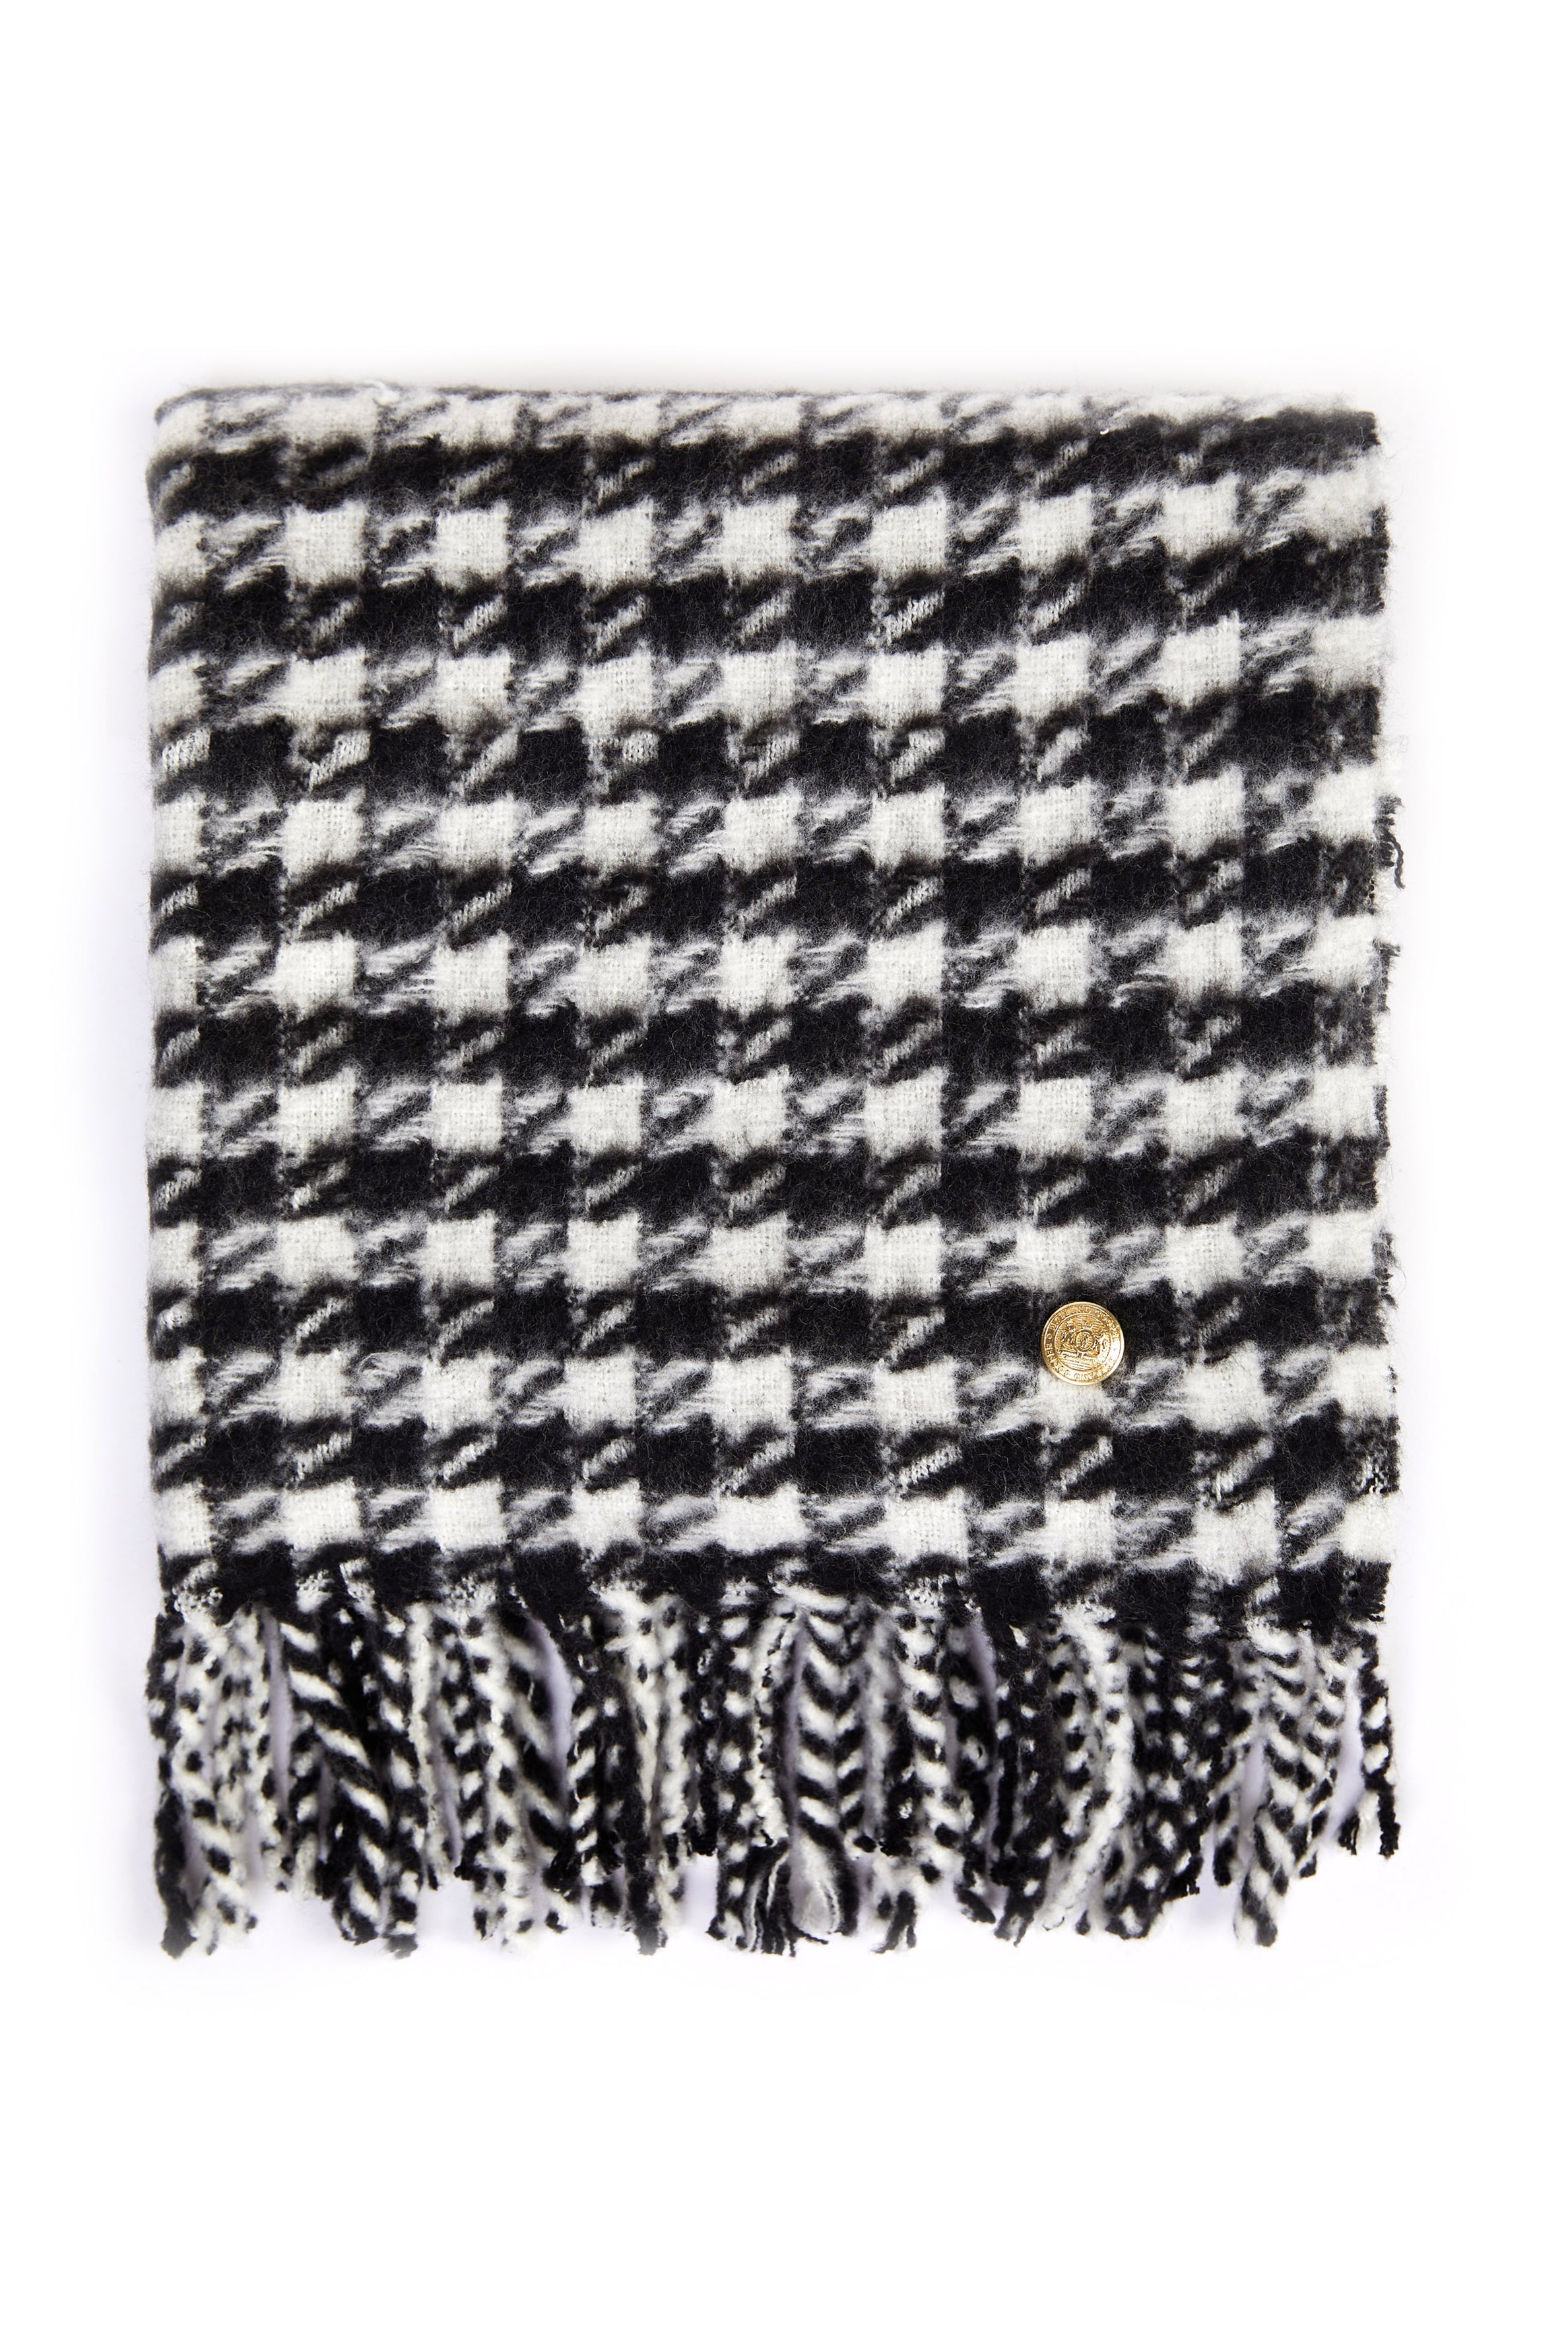 HC Chelsea Scarf (Houndstooth) – Holland Cooper